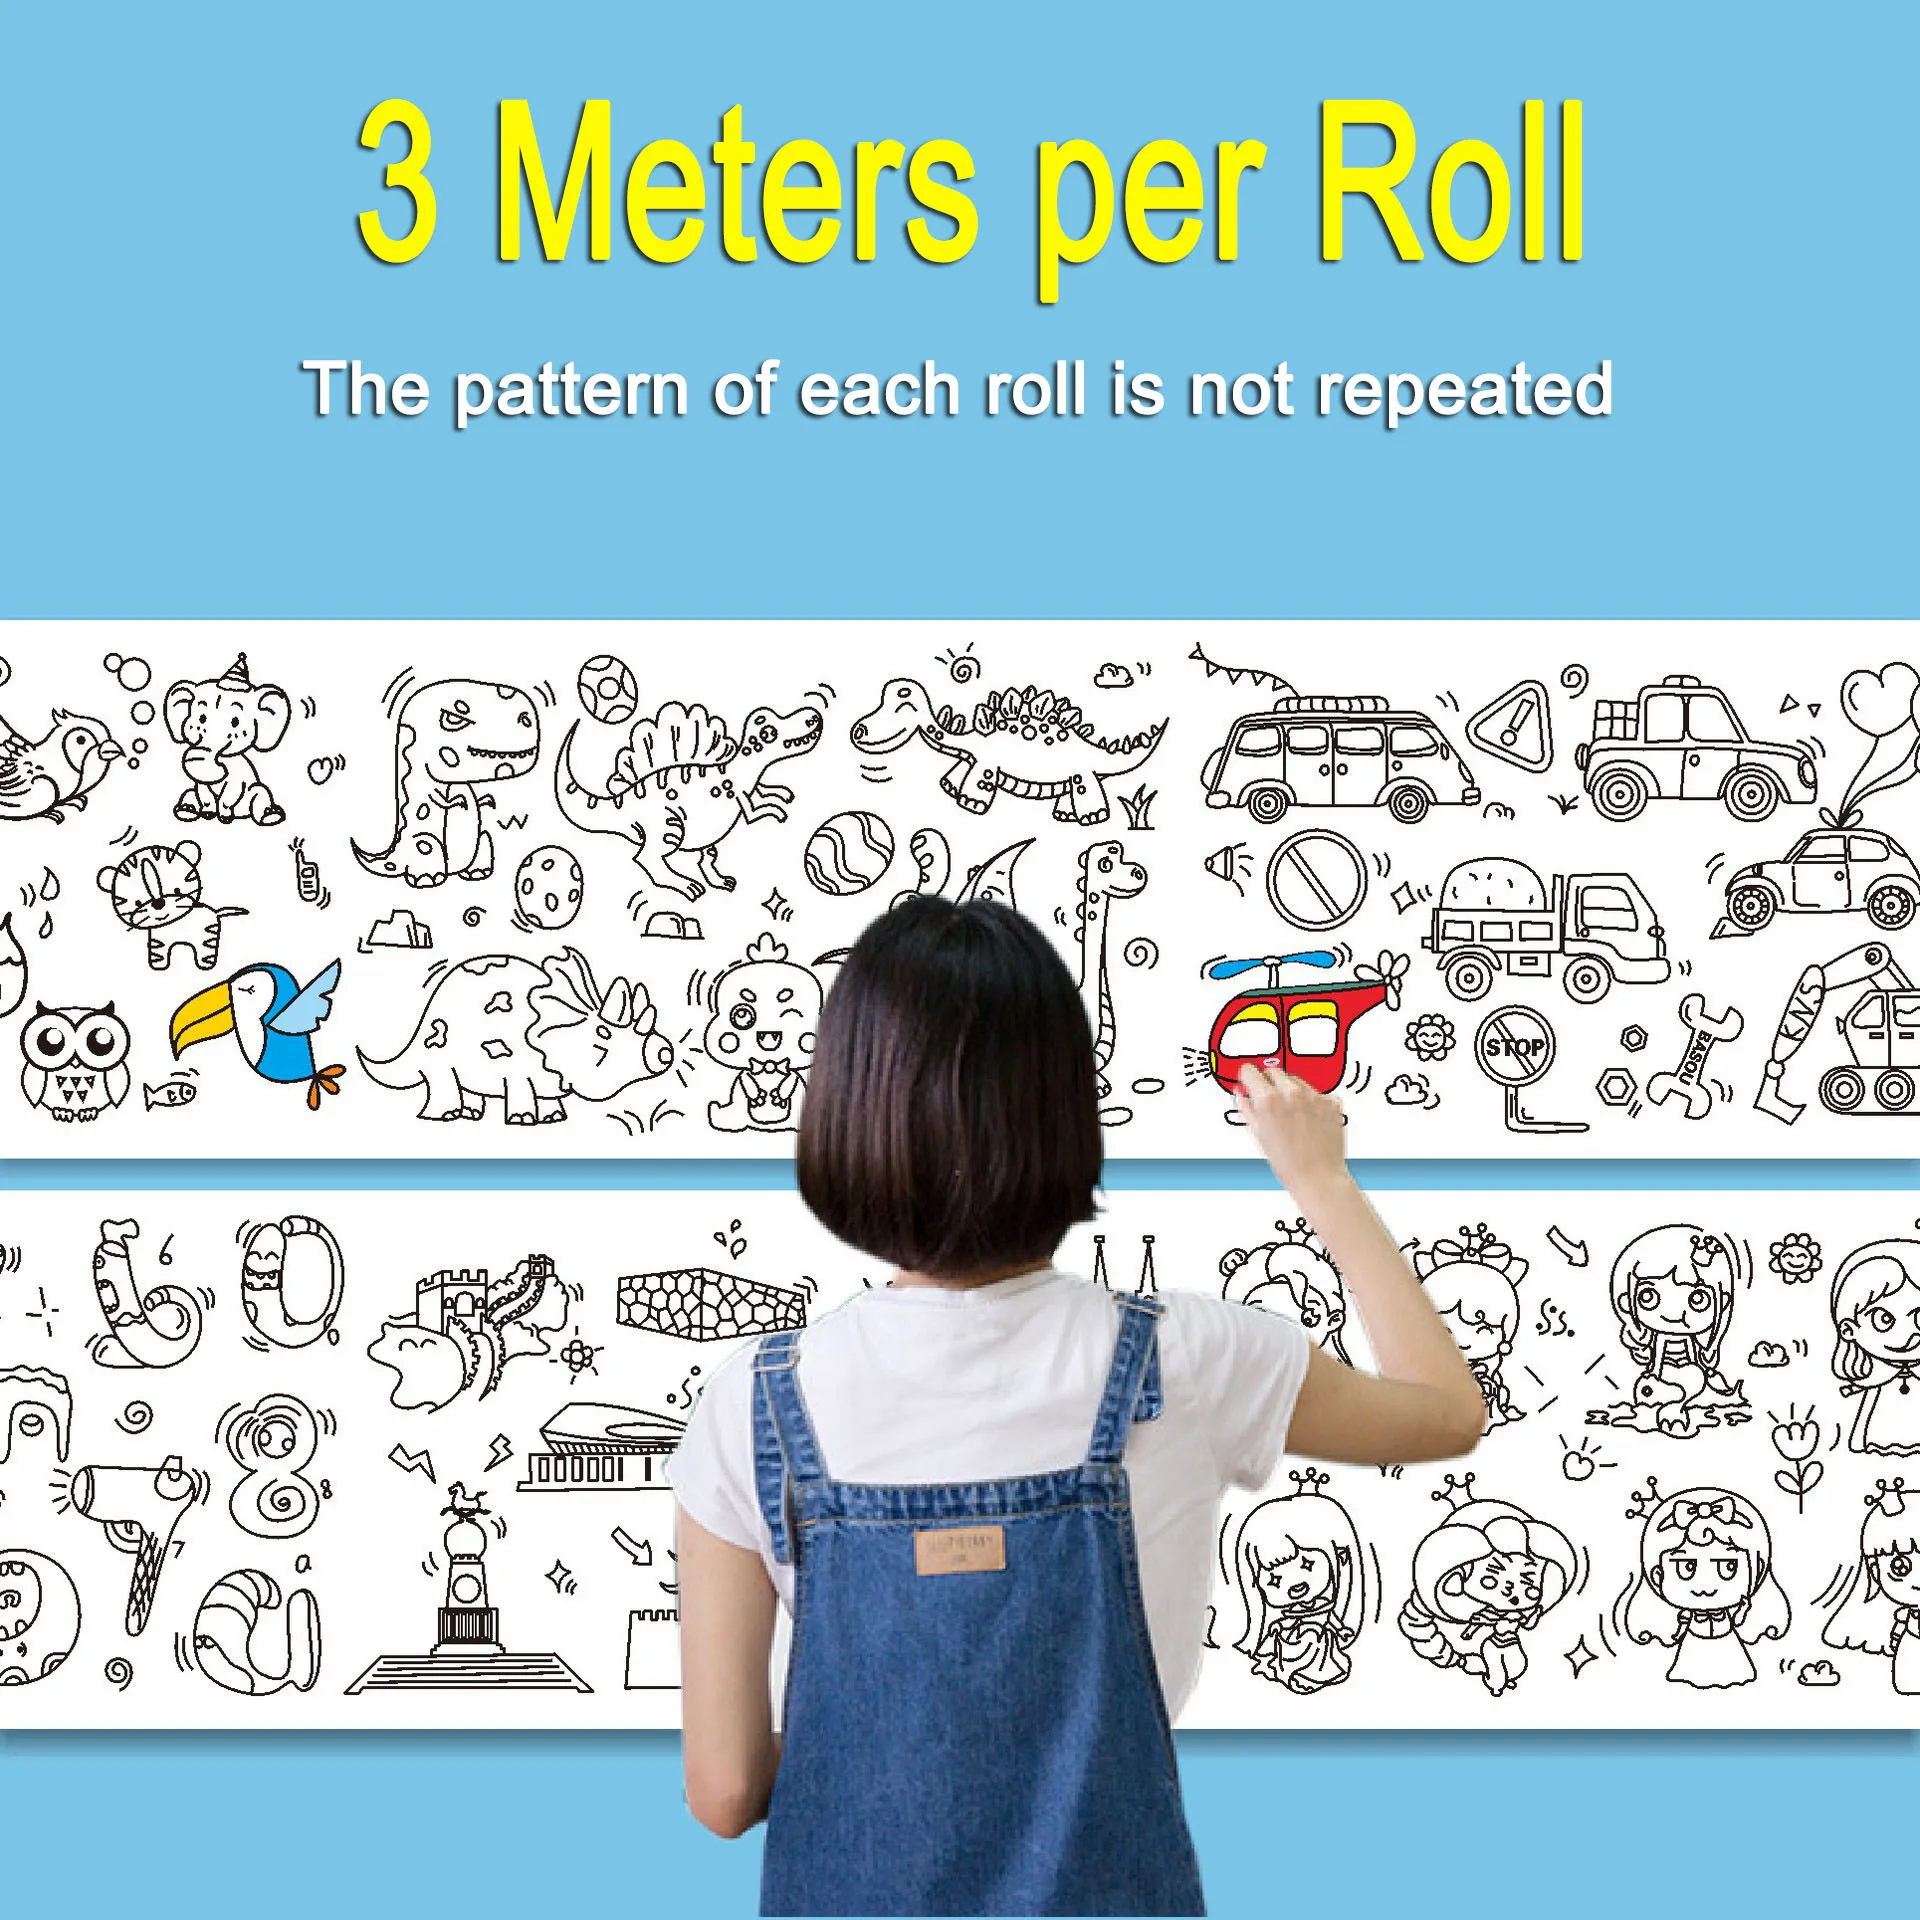 Children's Drawing Roll Sticky Color Filling Paper Graffiti Scroll Coloring  Paper Roll for Kids DIY Painting Educational Toys - AliExpress